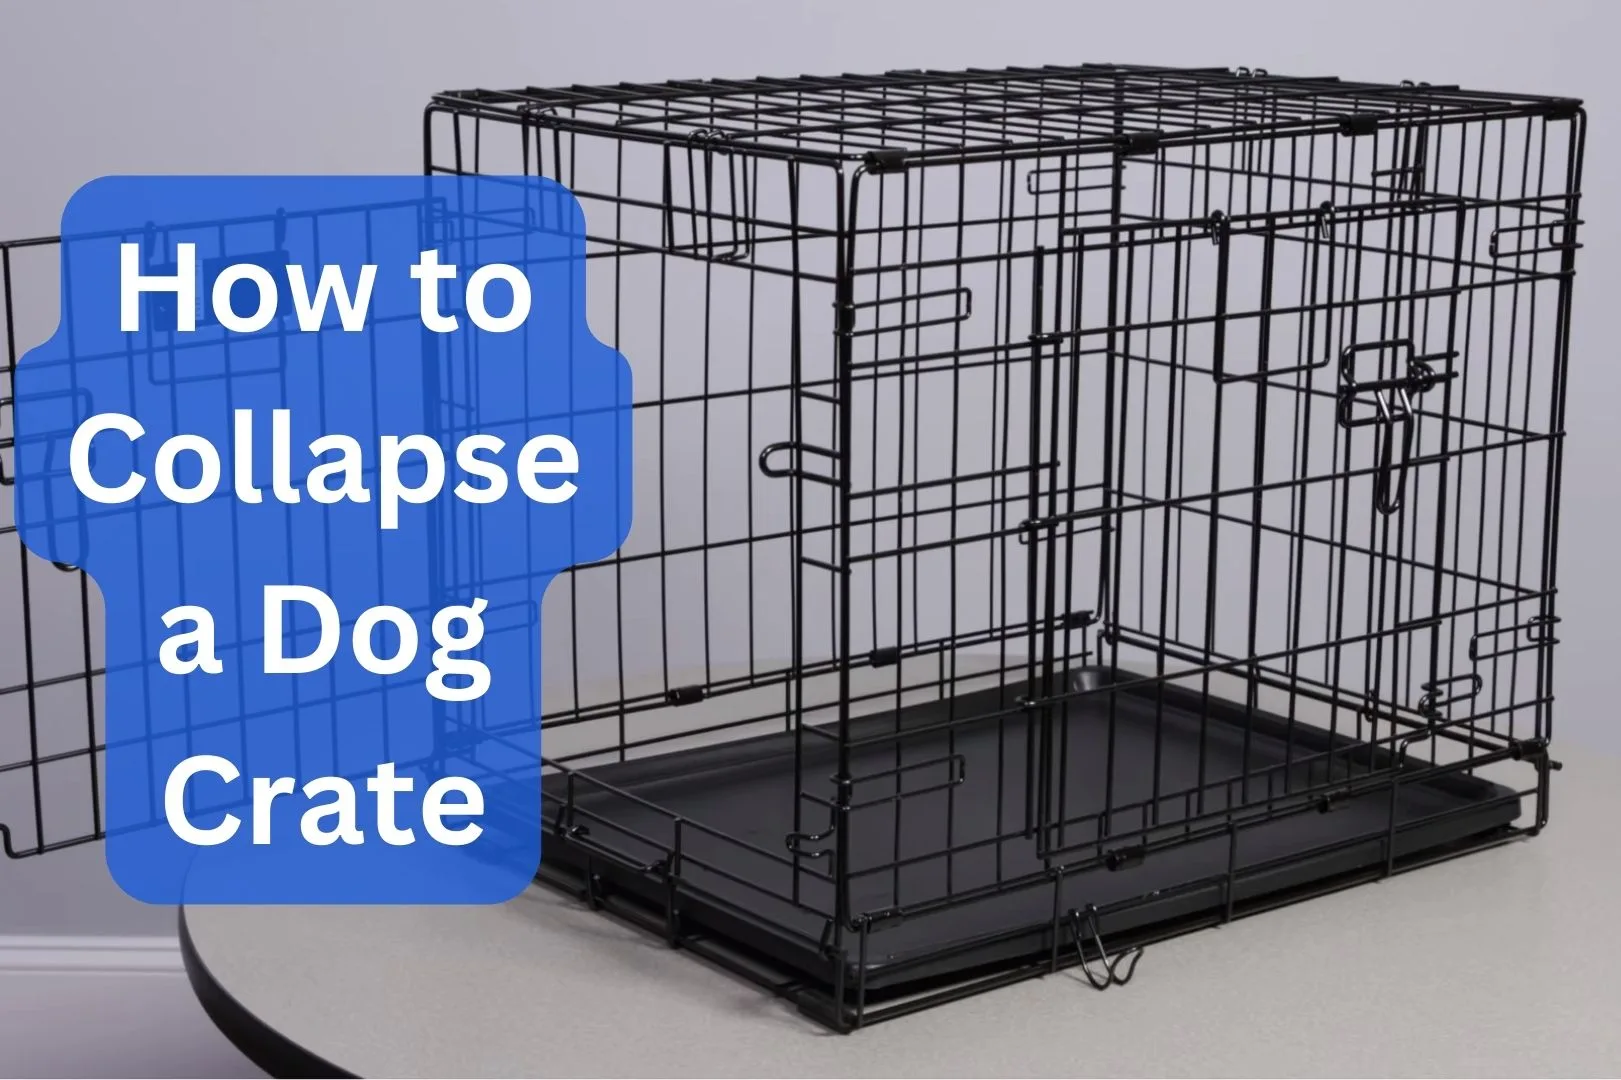 How to Collapse a Dog Crate